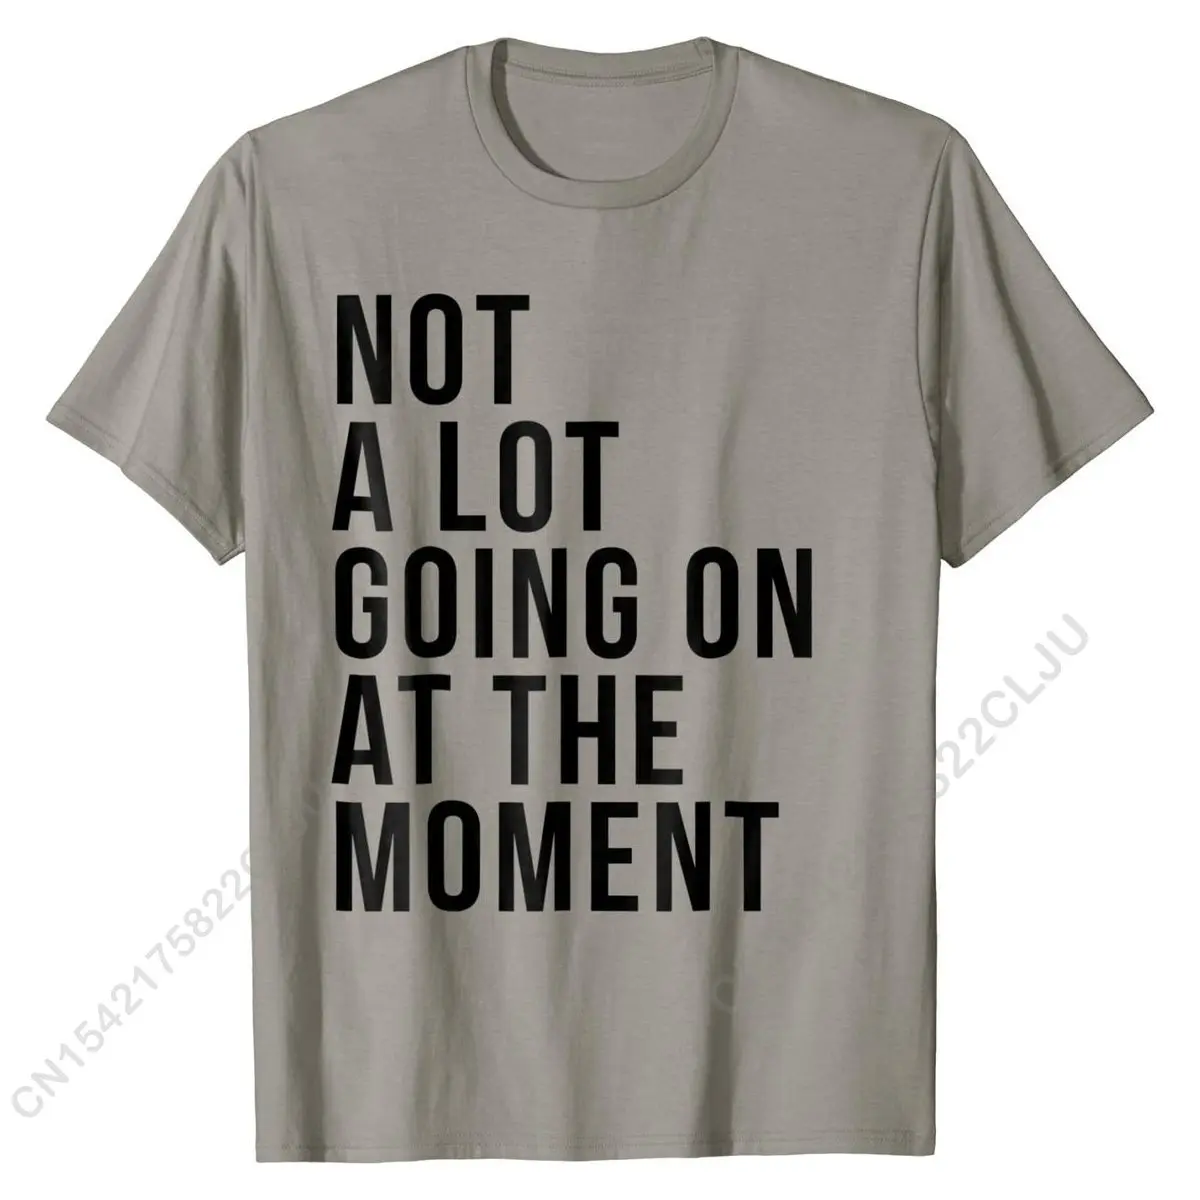 

Funny T-shirt - Not A Lot Going On At The Moment Tops Tees Latest Party Cotton Men Top T-shirts Classic